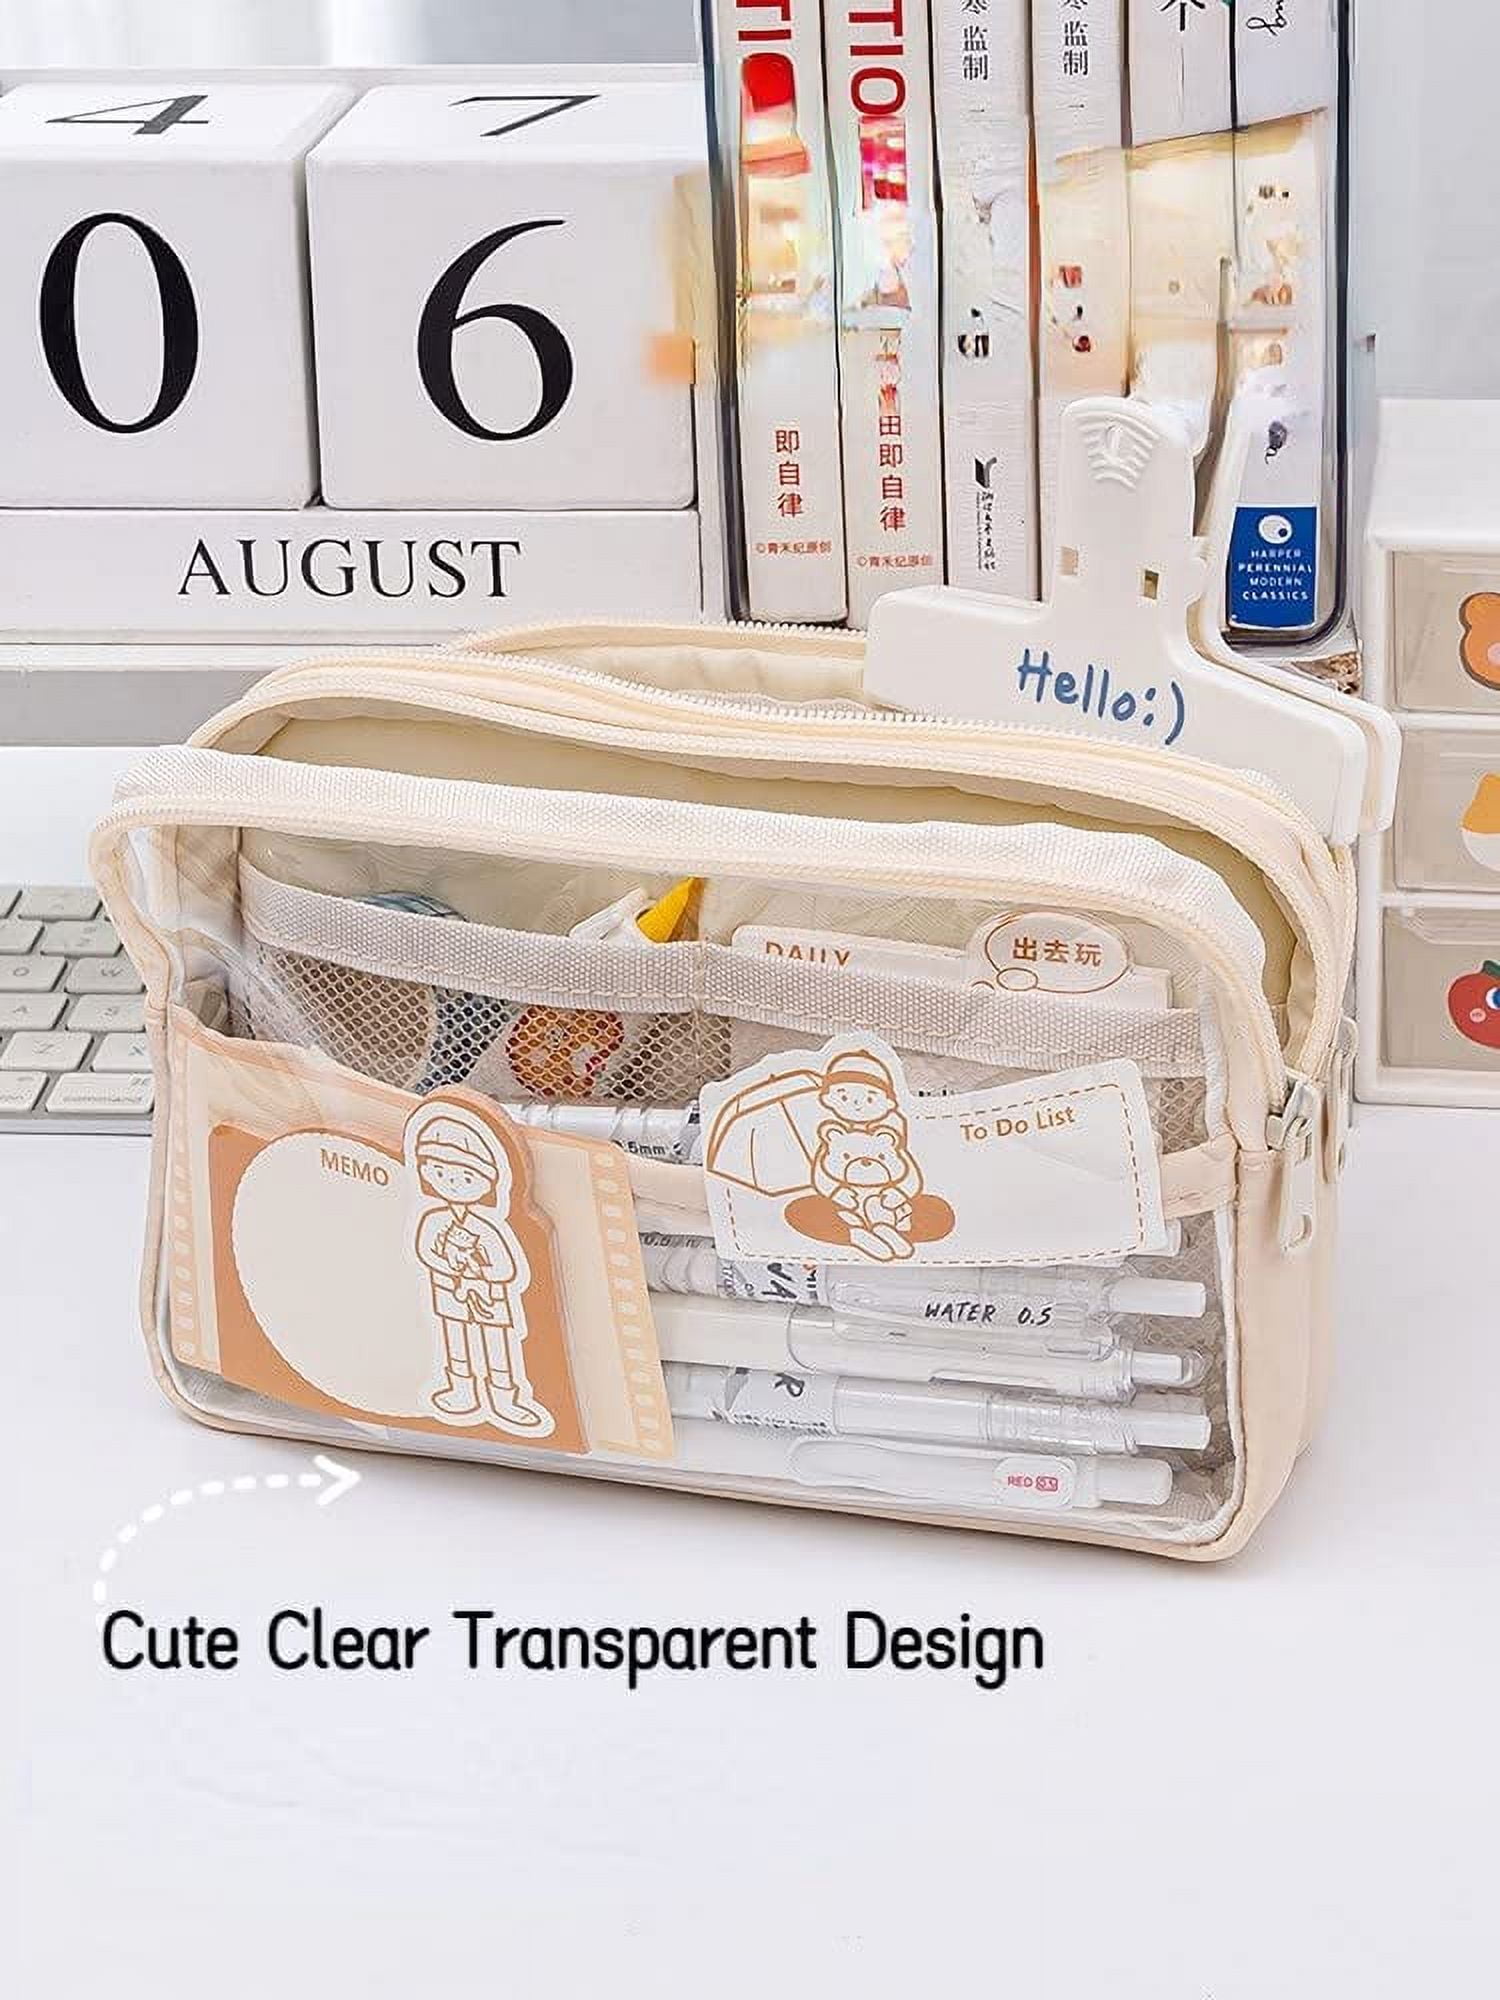 Canvas Pencil Case with Cute Pins, Zippered Pencil Pouch Pen Bag, Kawaii  Stationery Box for Office, Desk and Art, Aesthetic School Supplies for Back